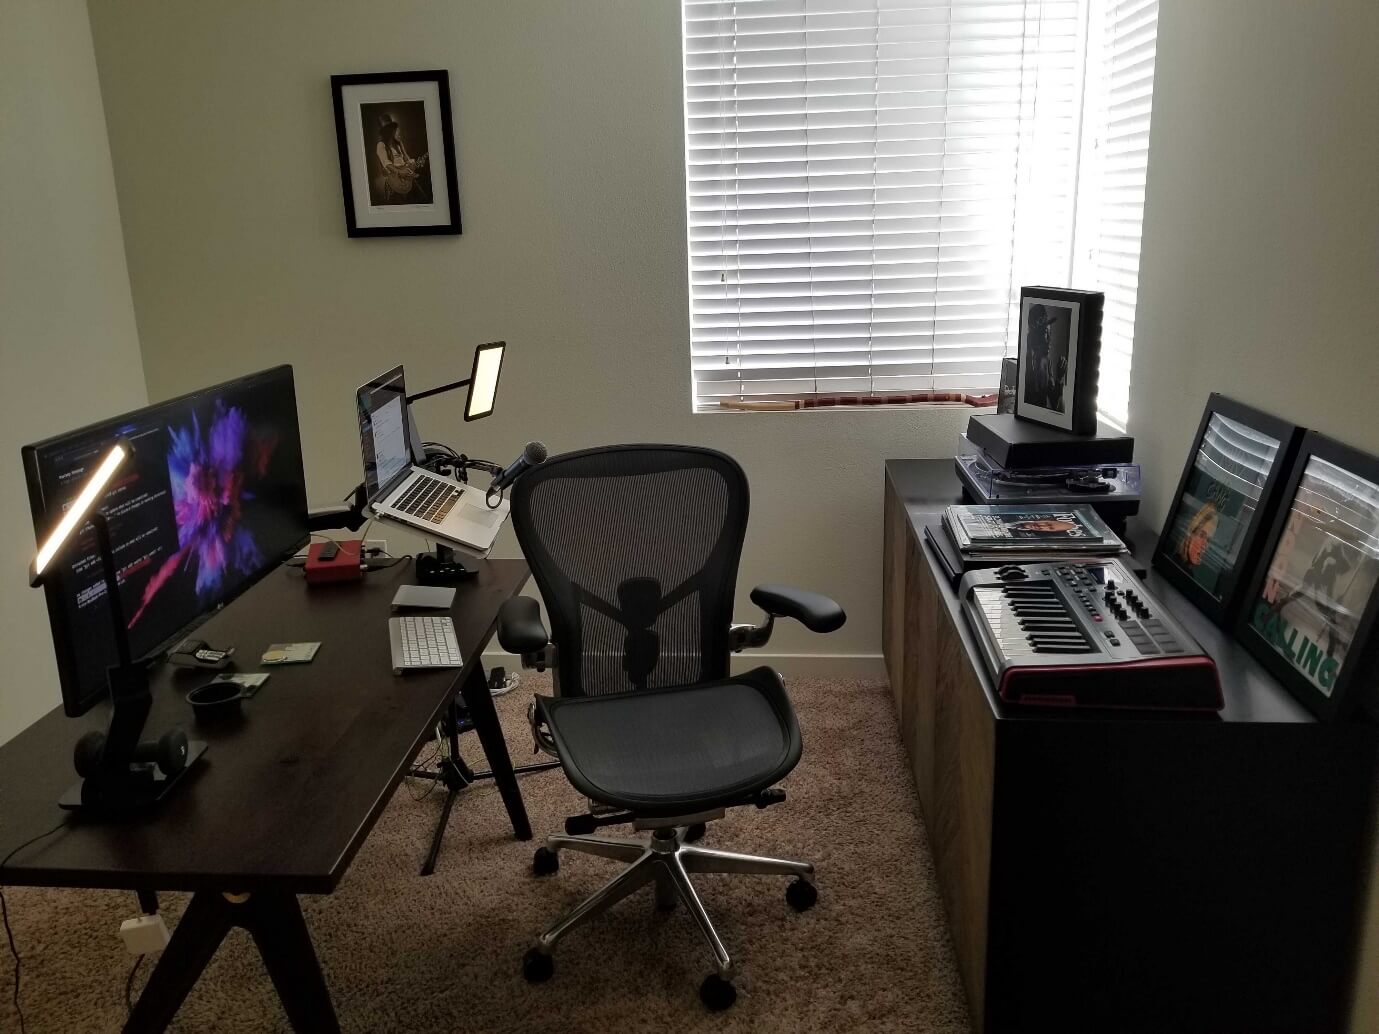 What Tech Essentials Do You Need to Set Up a Home Office?